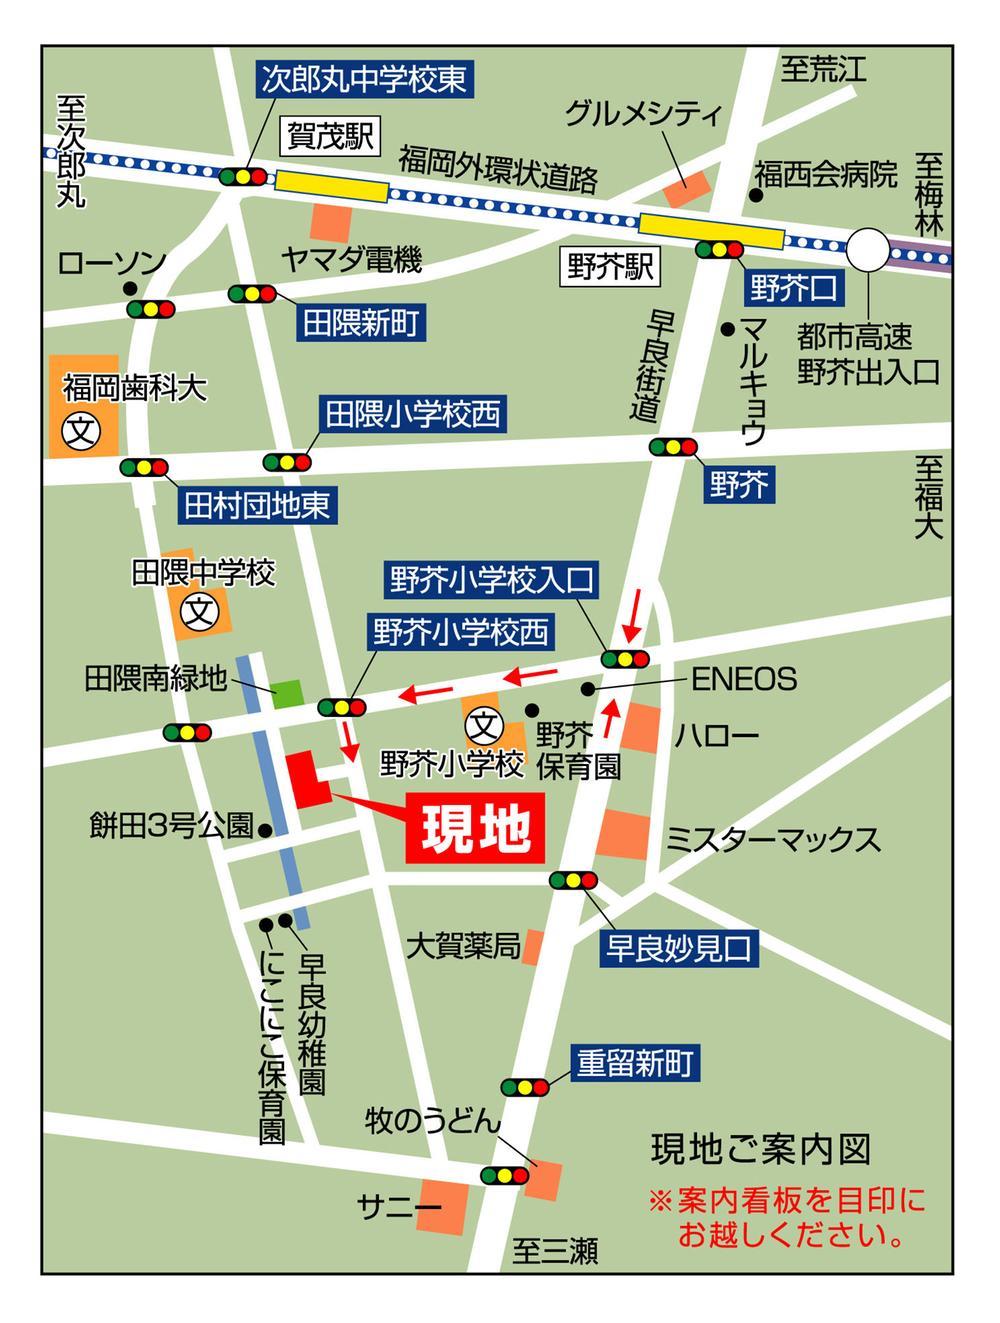 Local guide map. Please call in advance. Staff will guide.